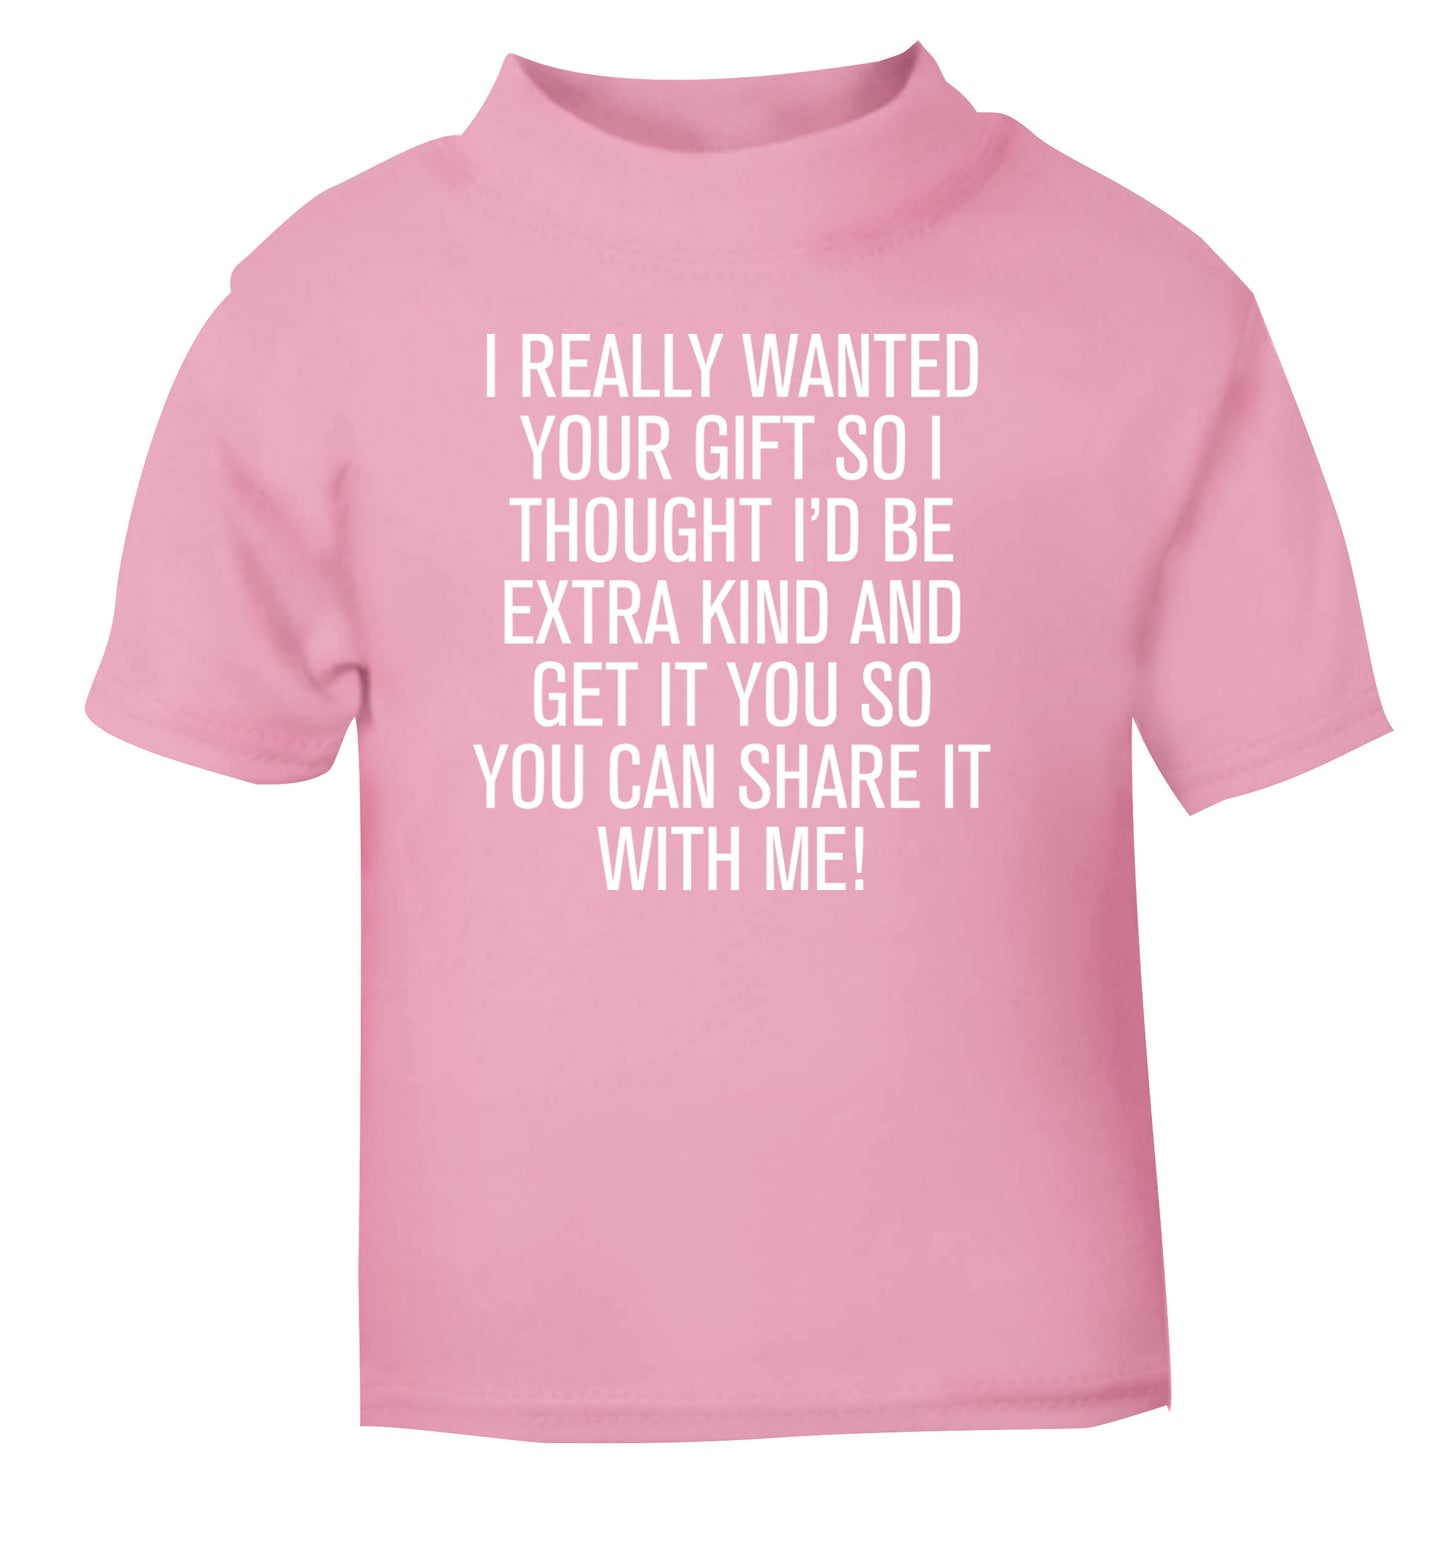 I really wanted your gift light pink Baby Toddler Tshirt 2 Years